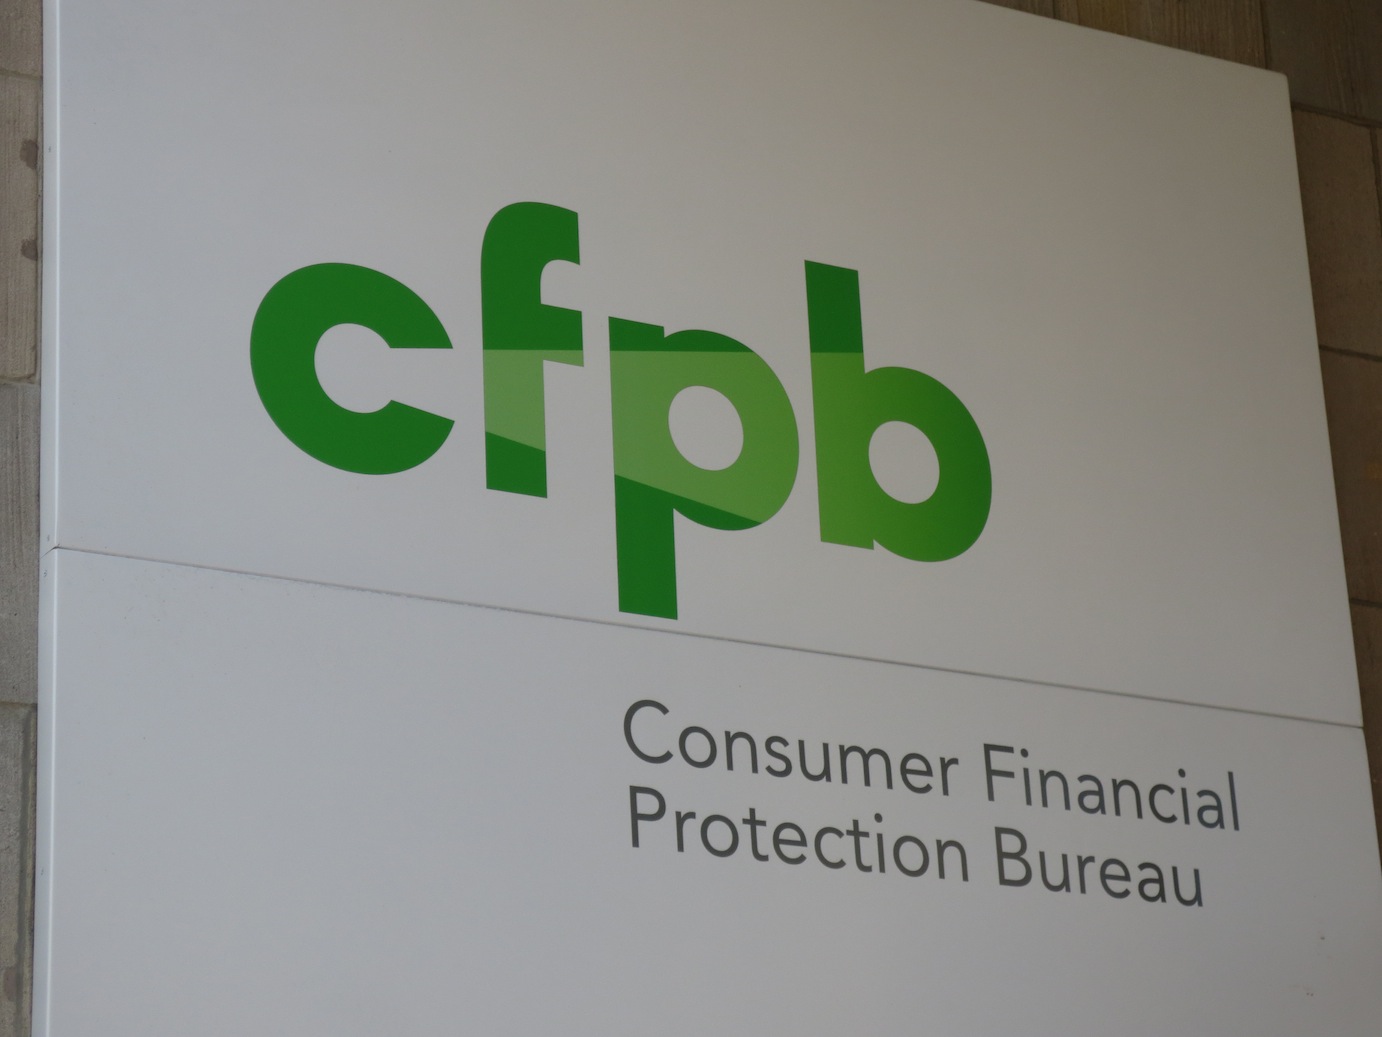 CFPB logo outside the building